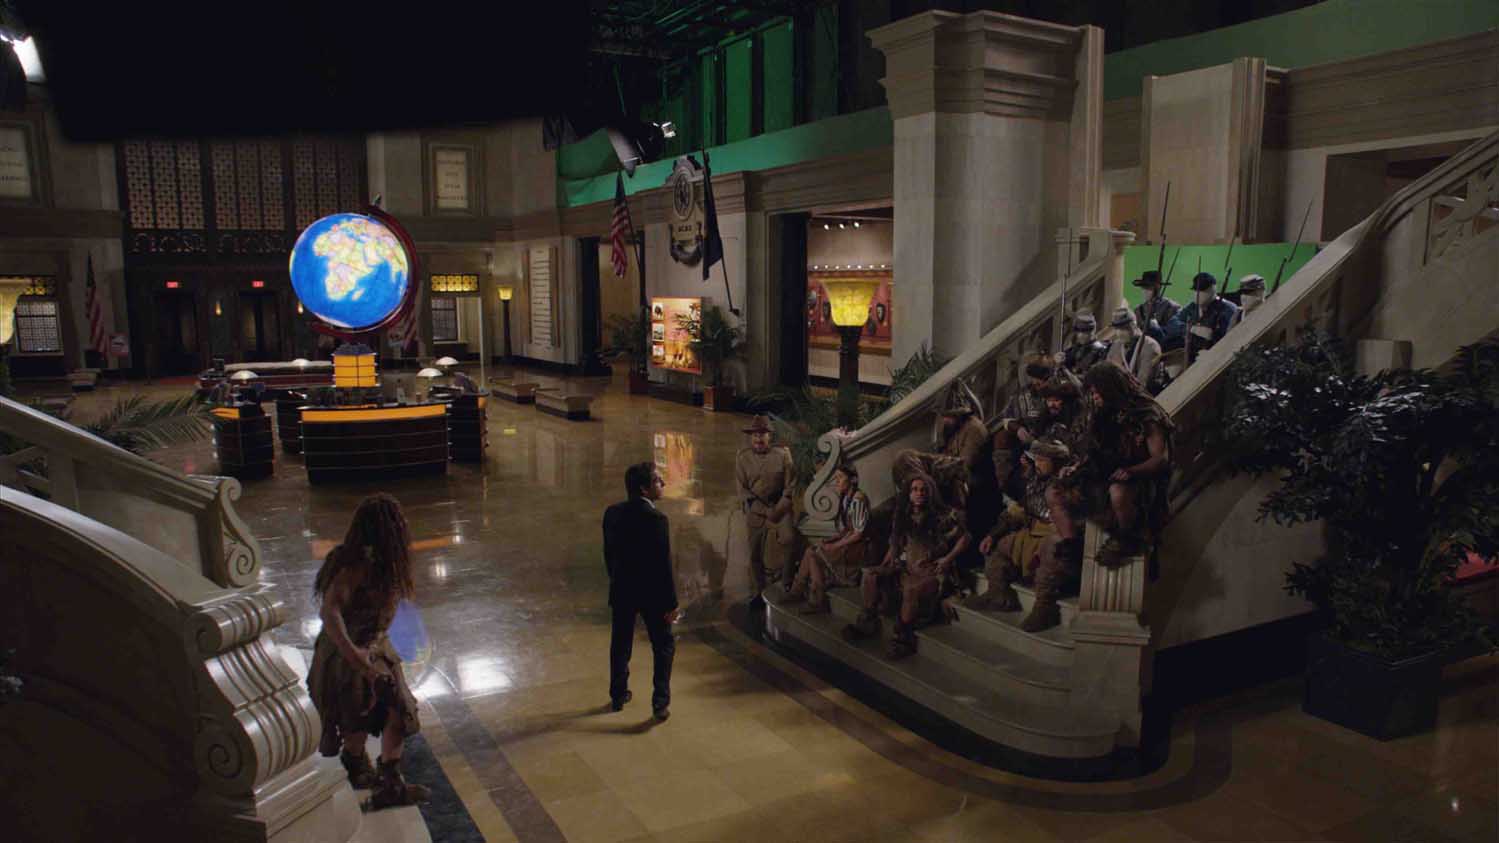 MPC Finishes 250 VFX Shots for Night at the Museum: Secret of the Tomb